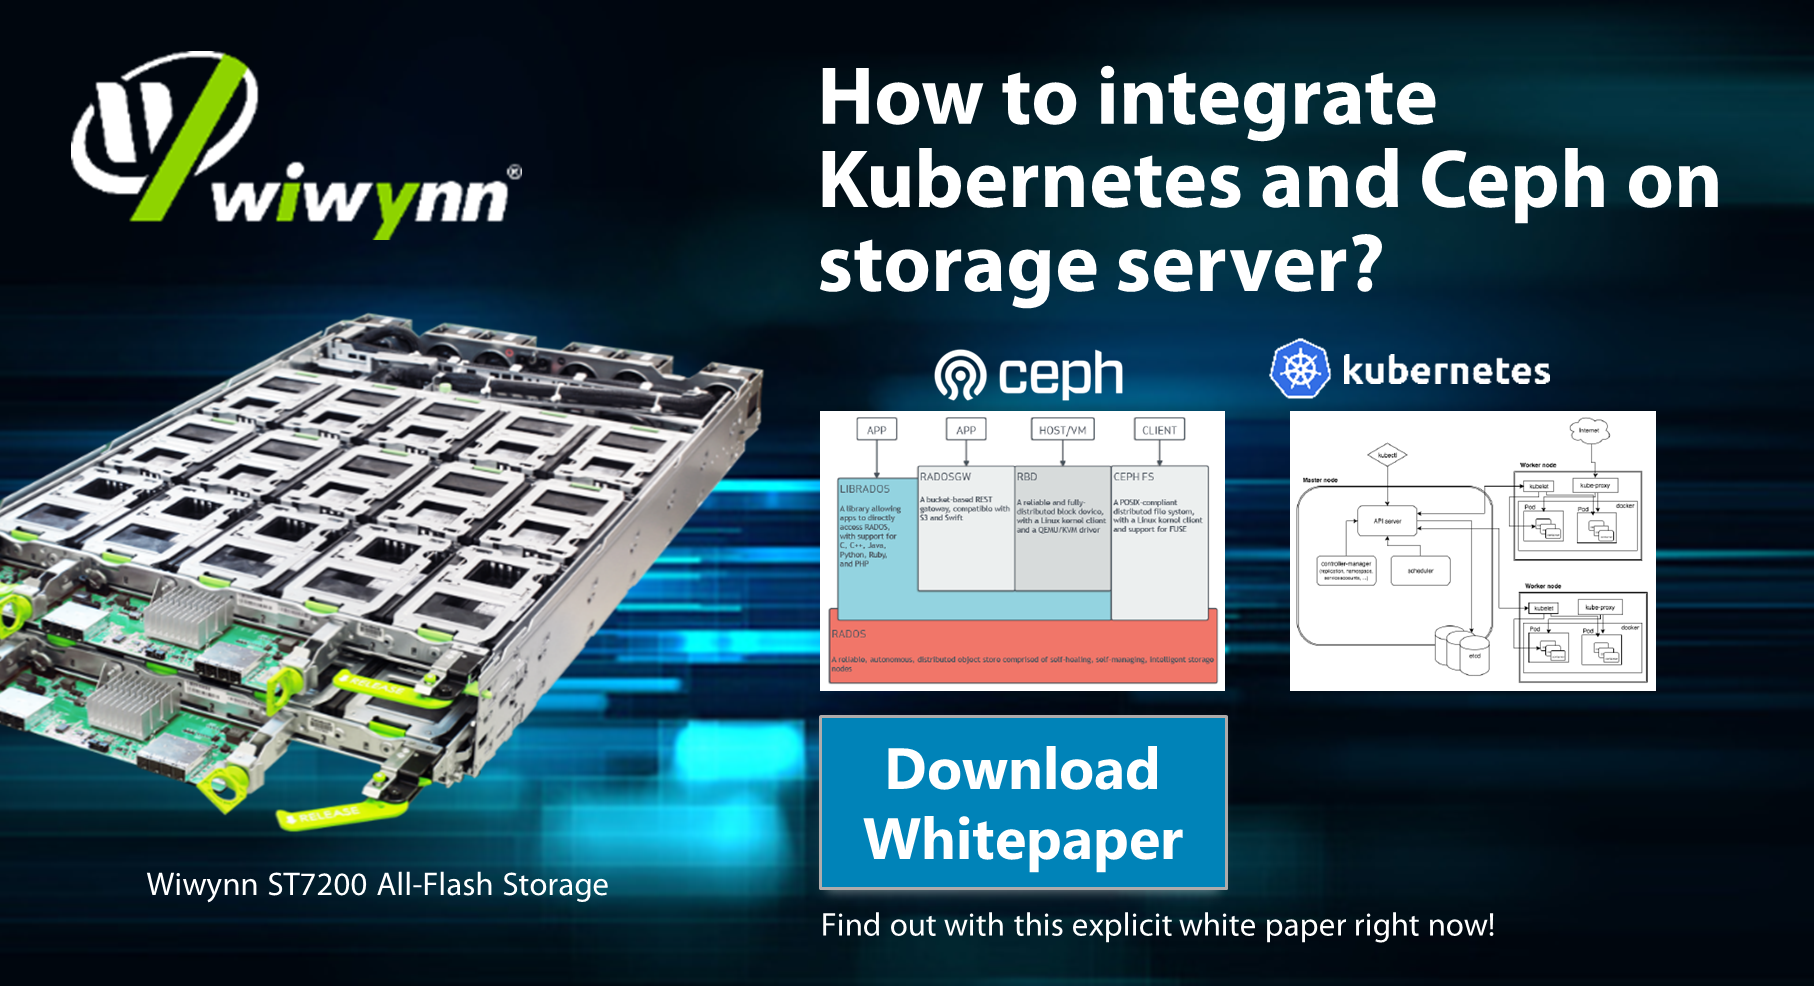 Integrate Ceph and Kubernetes on Wiwynn ST7200-30P All-Flash Storage